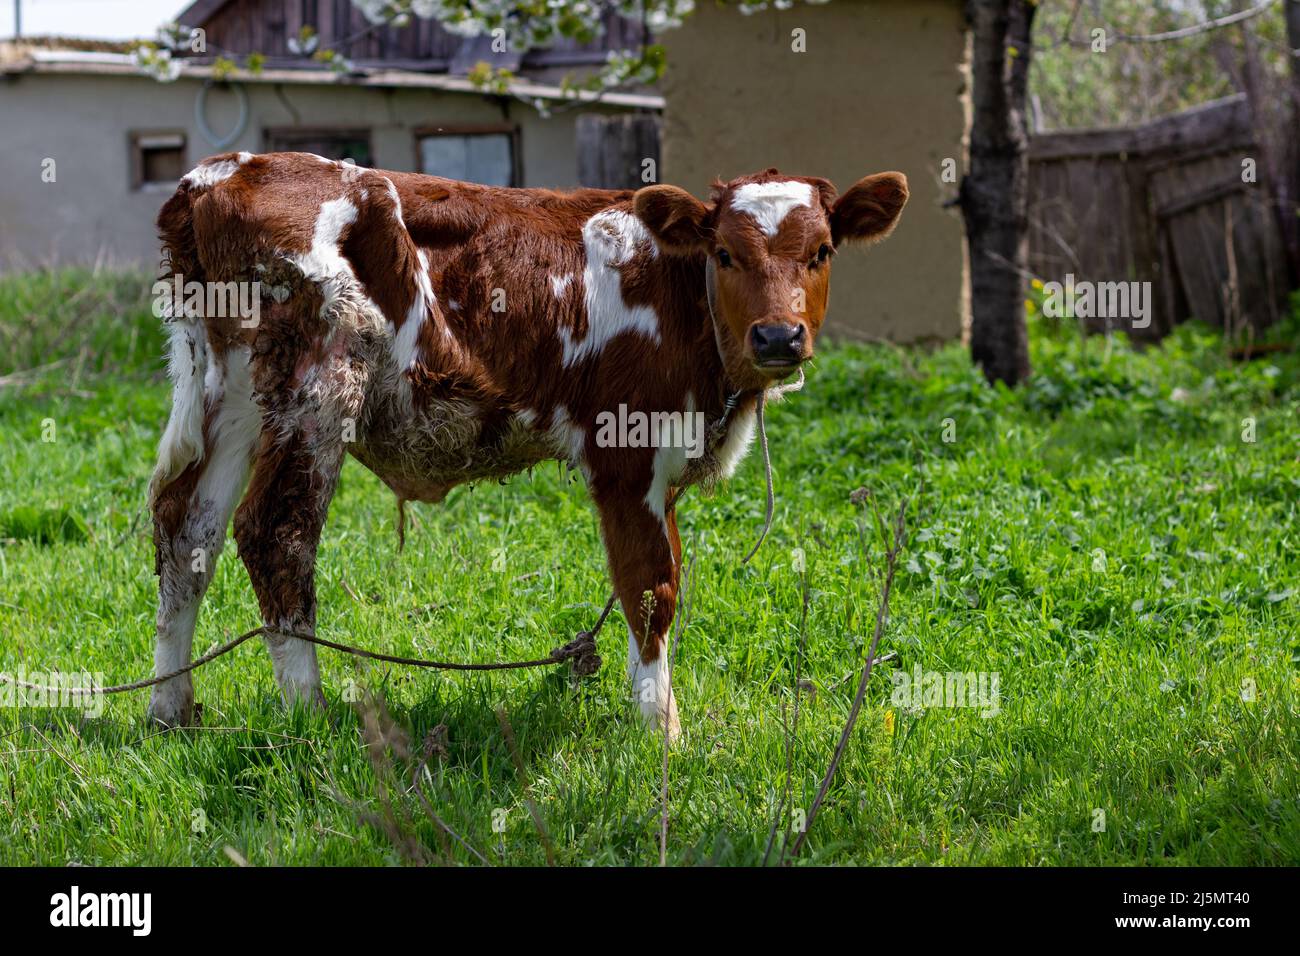 Dirty new born pet calf standing in animal field. Pet animal husbandry and Dairy life concept.  Stock Photo